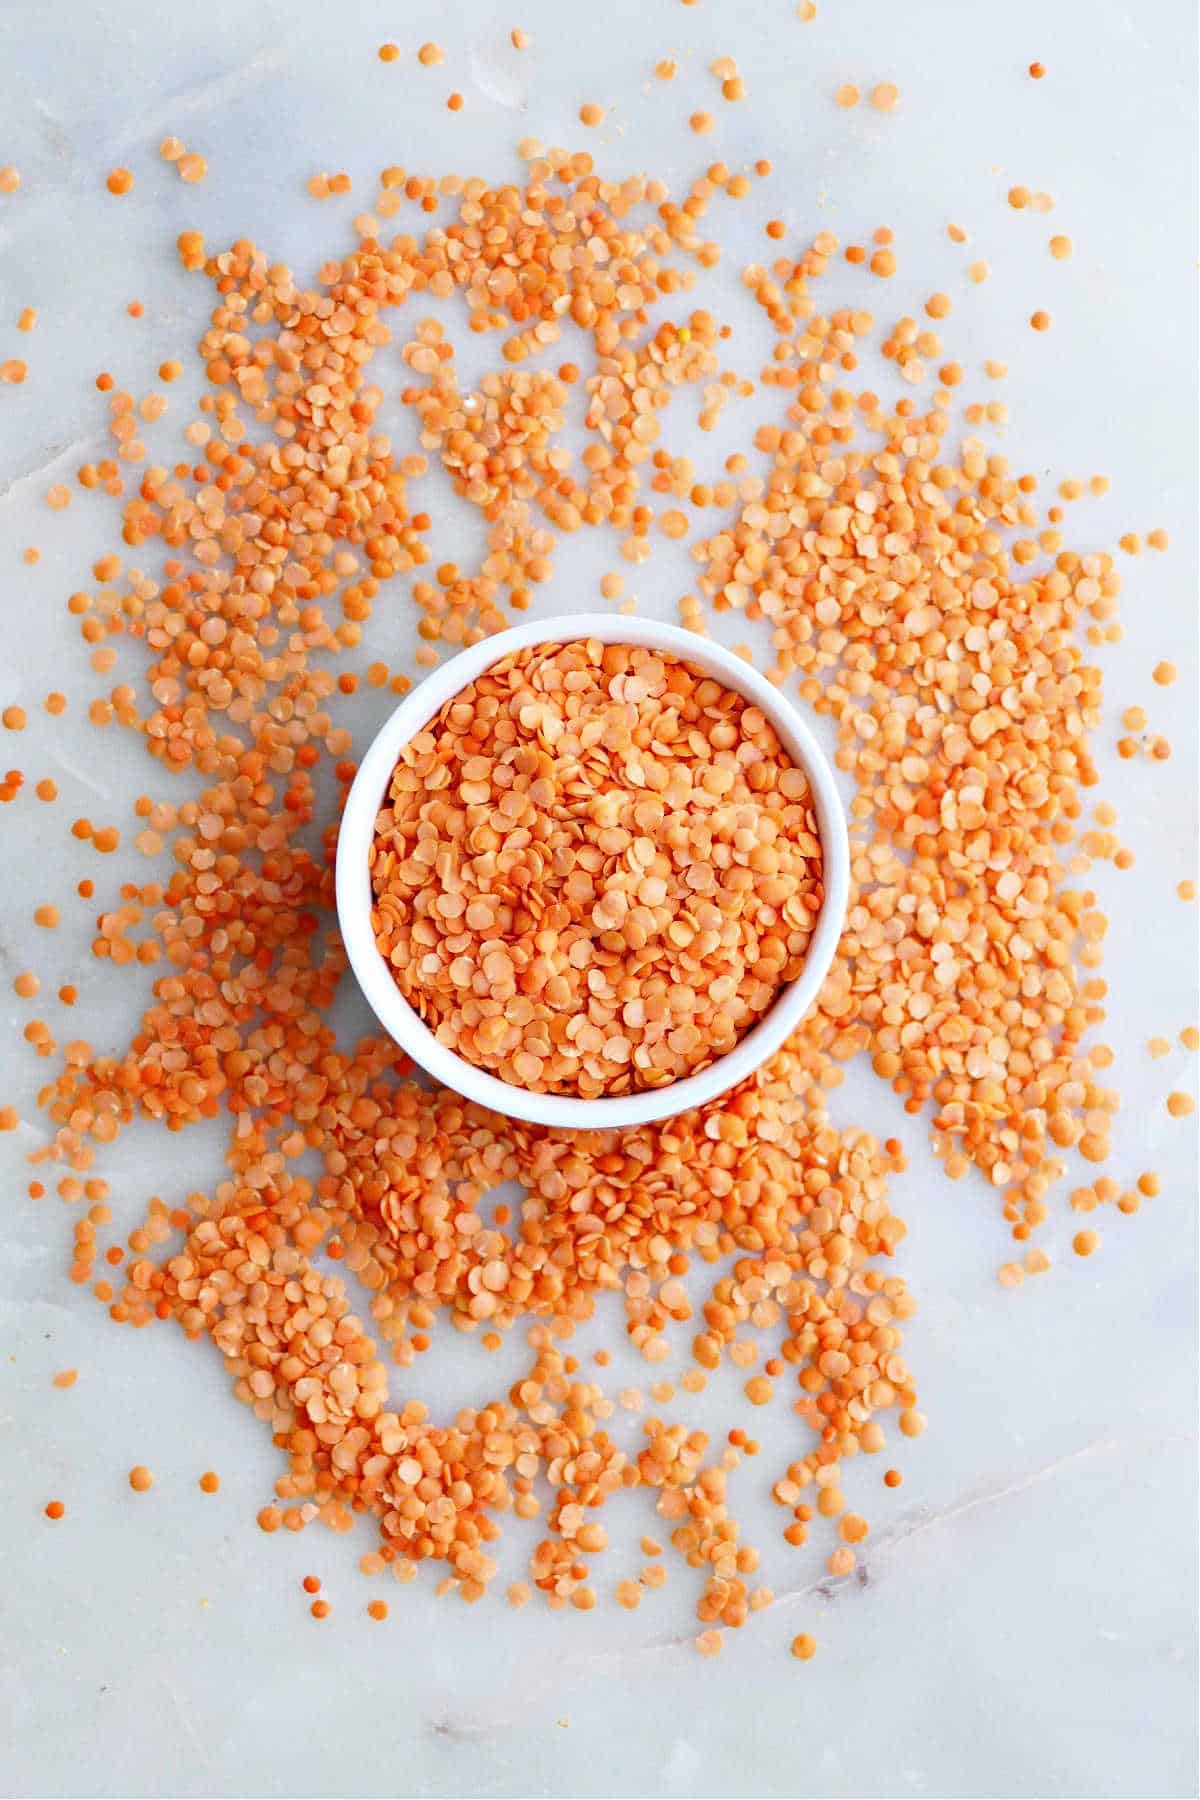 dry red split lentils in a bowl surrounded by loose lentils on a counter